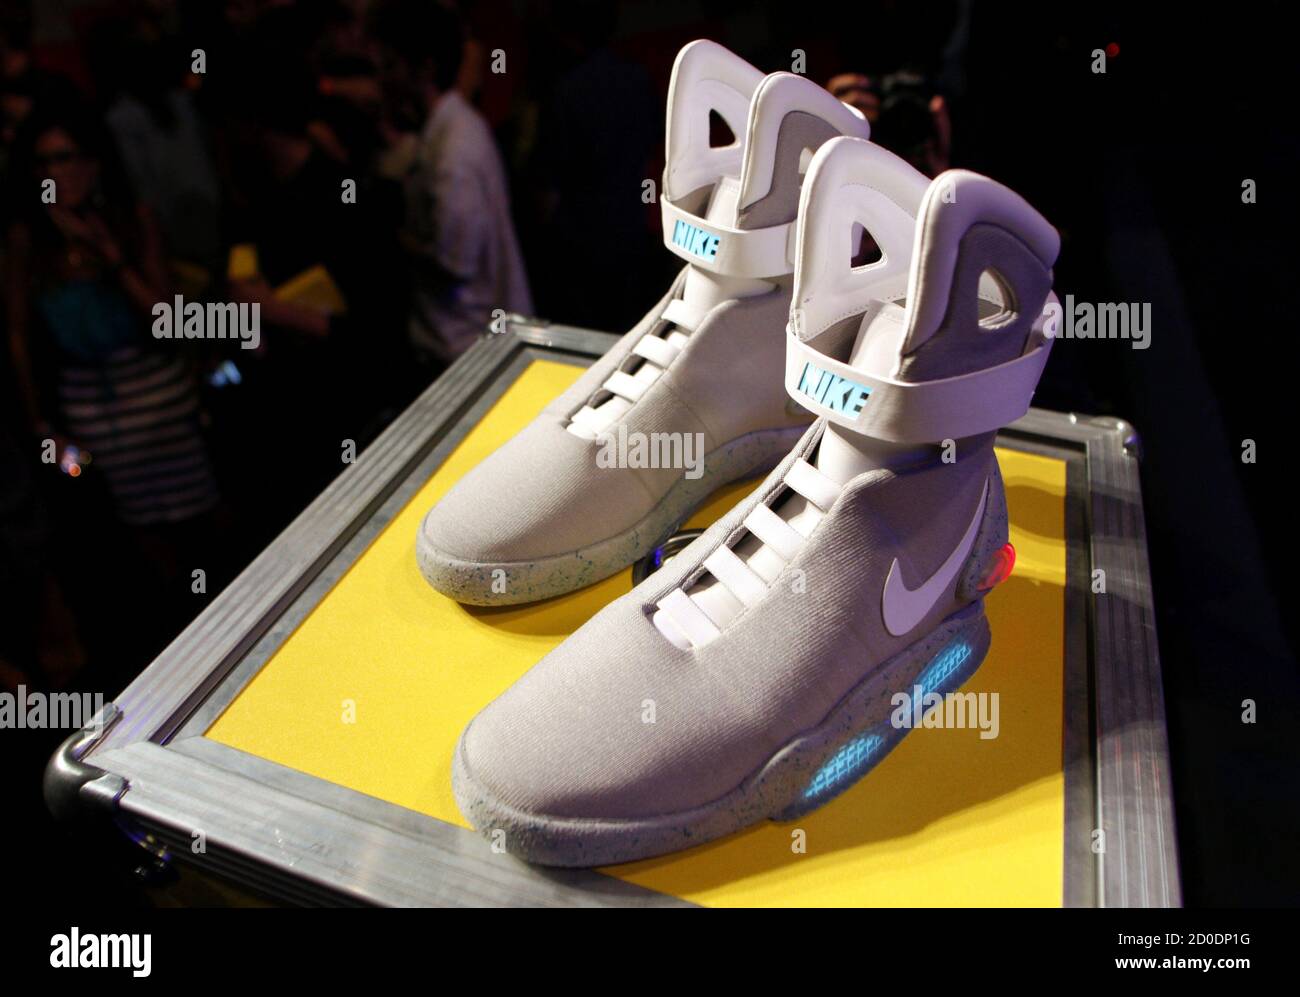 A pair of 2011 NIKE MAG shoes, based on original NIKE worn in 2015 by "Back to Future" character Marty McFly, played by Michael J. Fox, is displayed